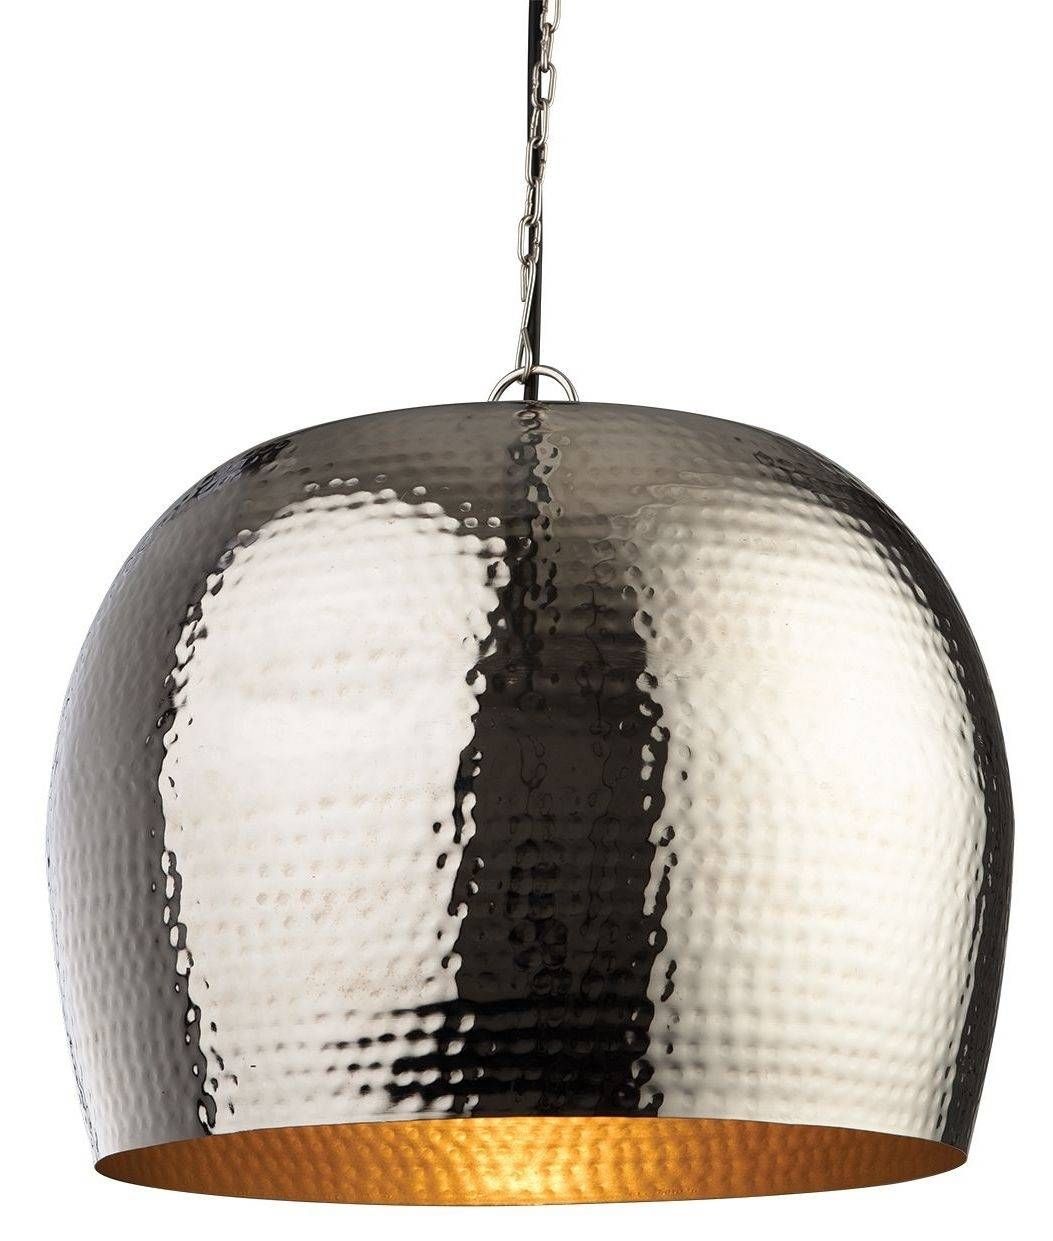 Hammered Finish Metal Pendant 350mm Throughout Hammered Metal Pendant Lights (View 1 of 15)